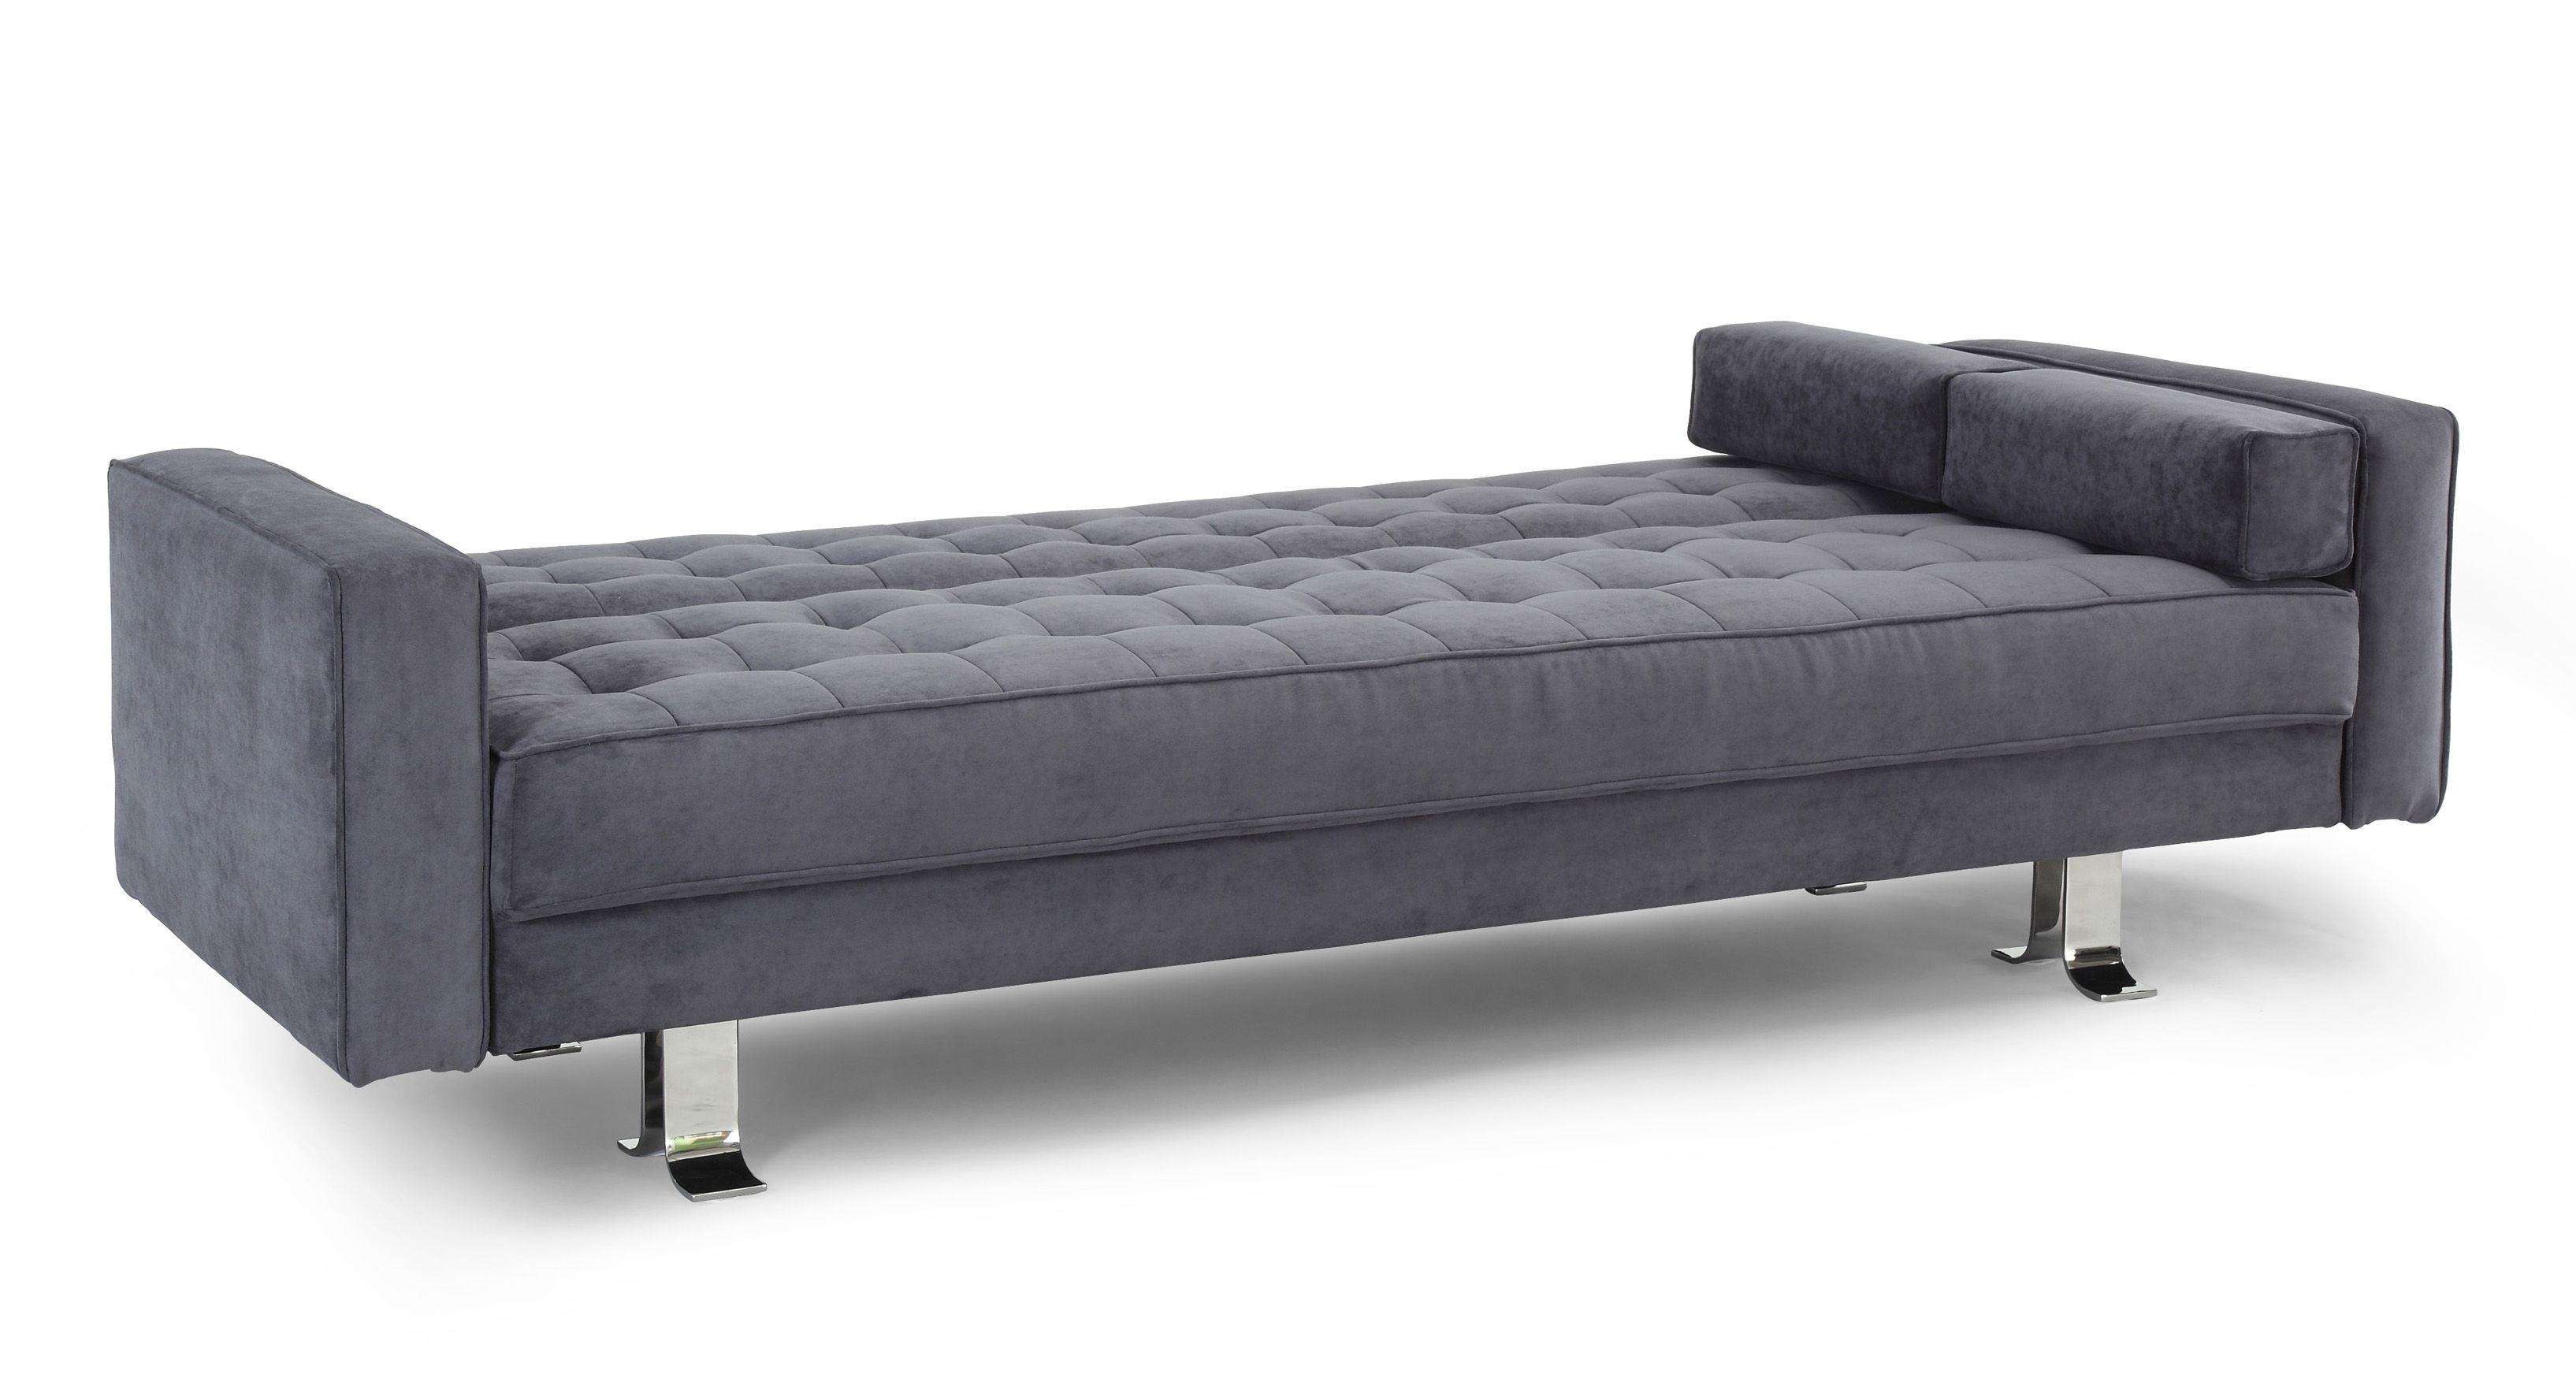 Lifestyle Solutions Rudolpho Convertible Sofa Ga Rup Cc Set Throughout Convertible Sofas (View 2 of 10)